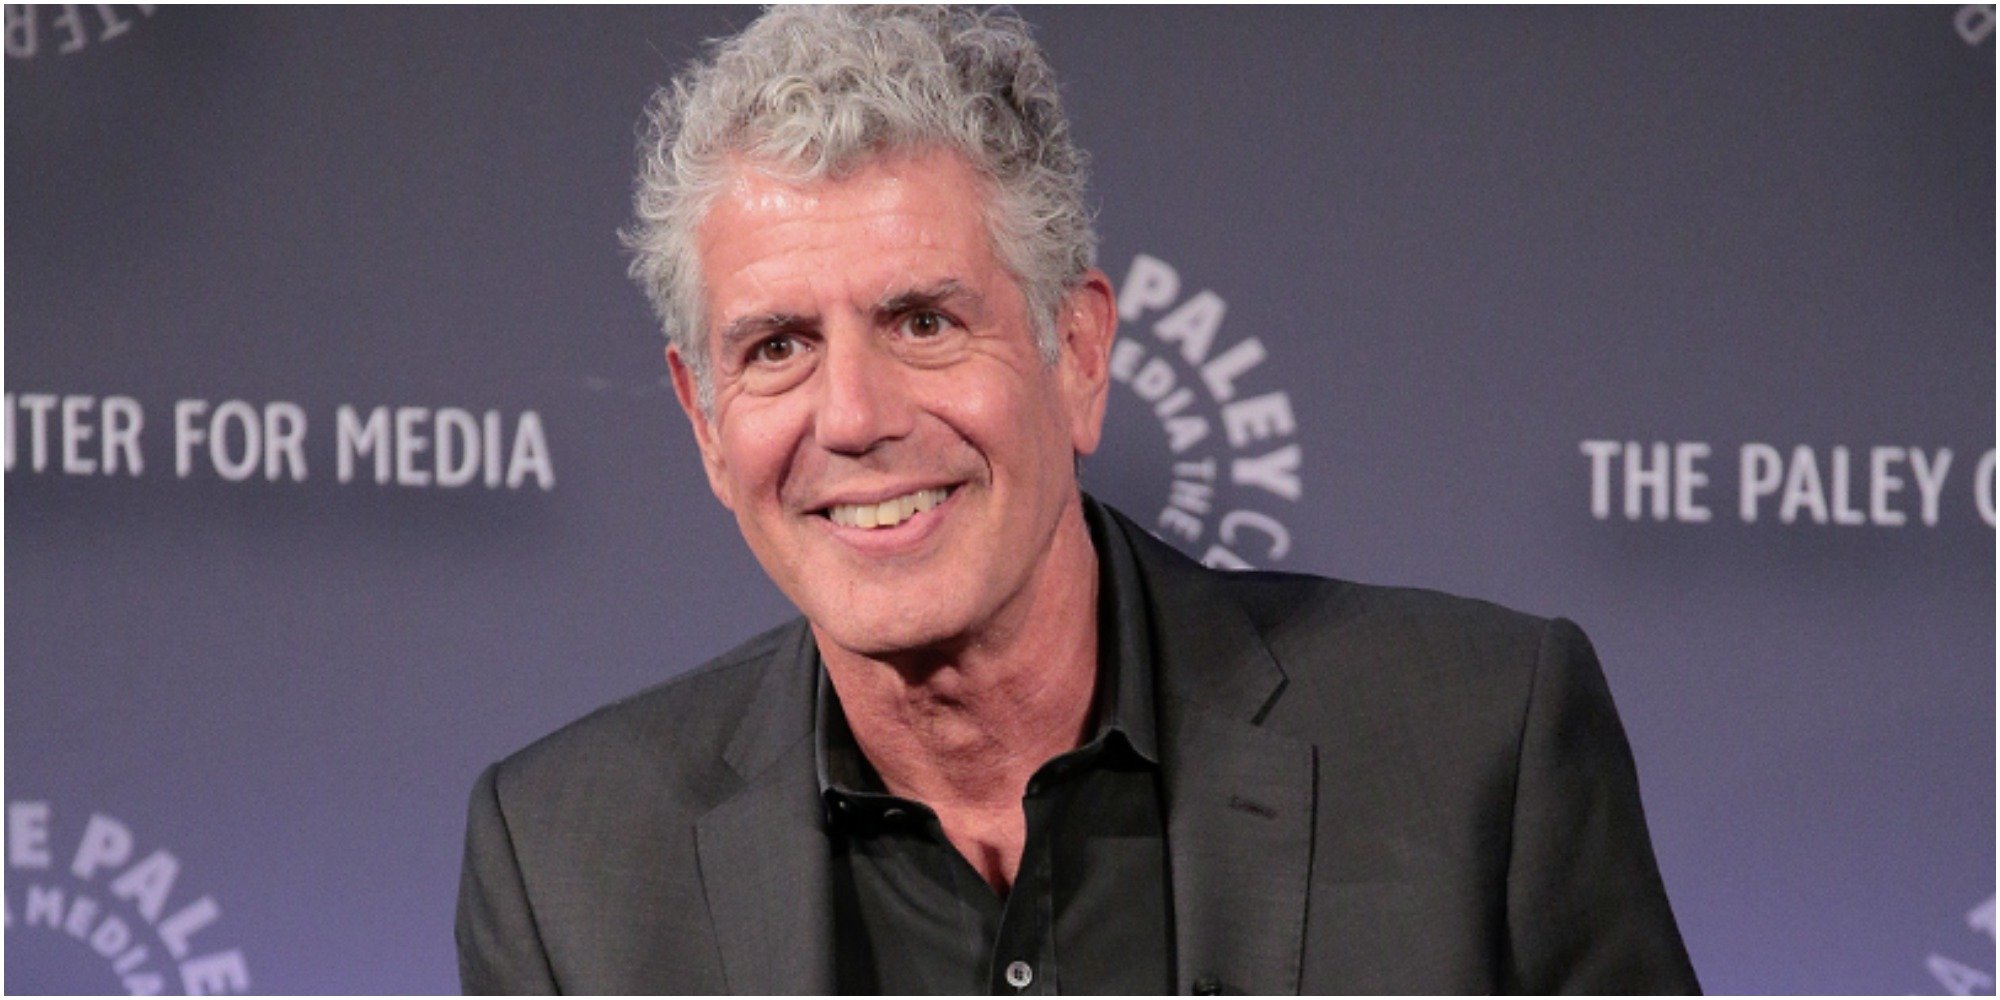 Anthony Bourdain smiles for the camera at a red carpet event.